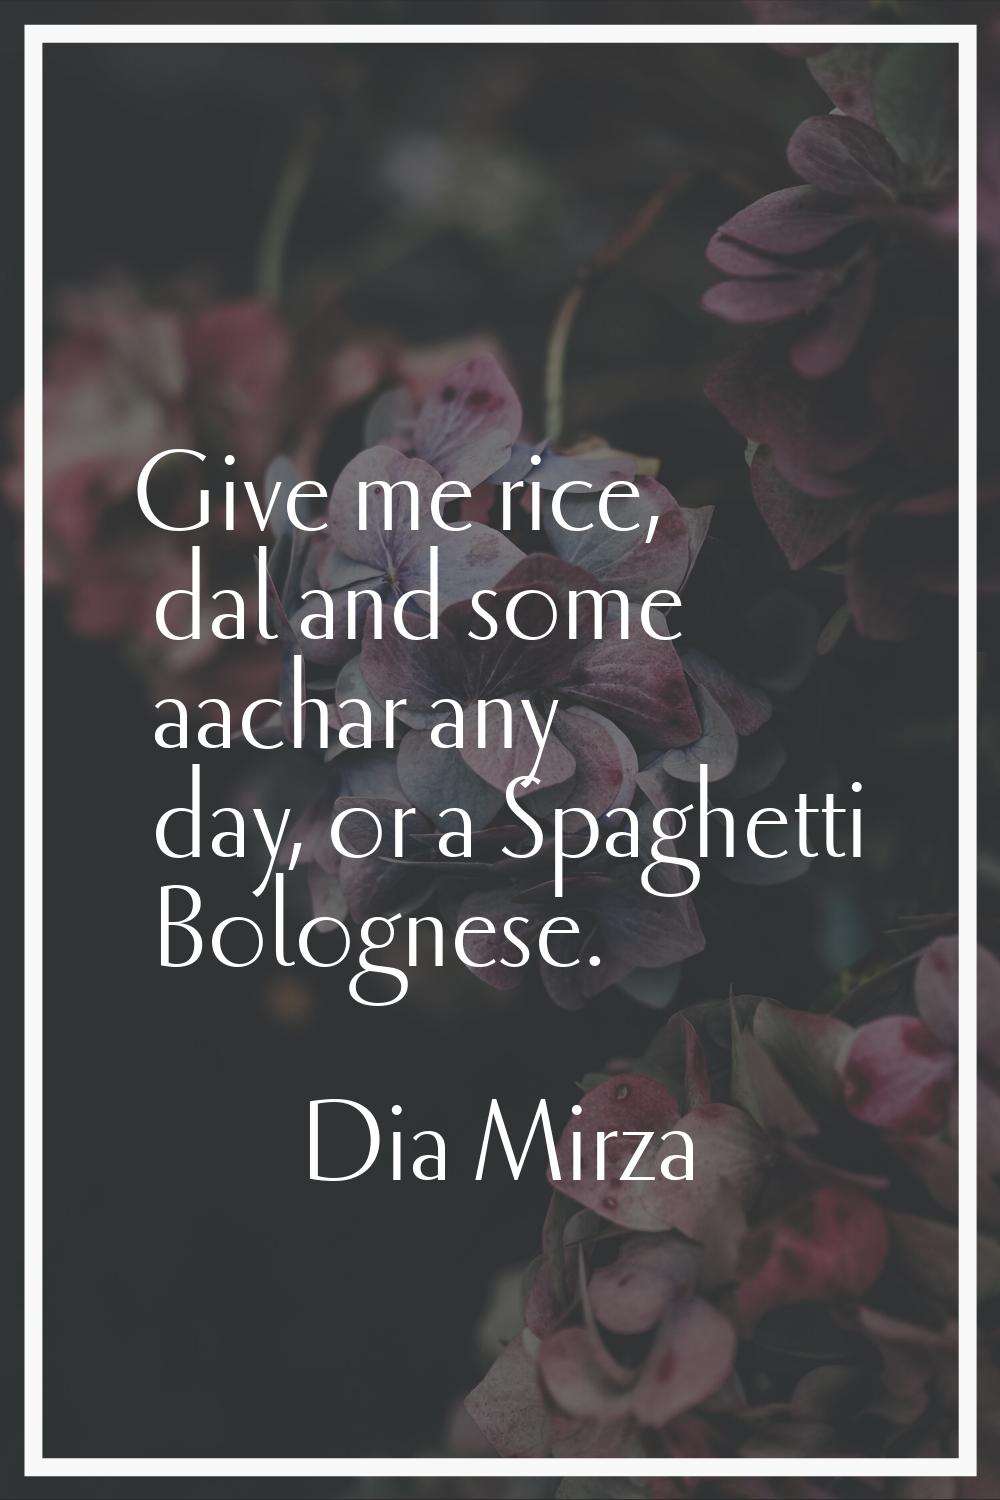 Give me rice, dal and some aachar any day, or a Spaghetti Bolognese.